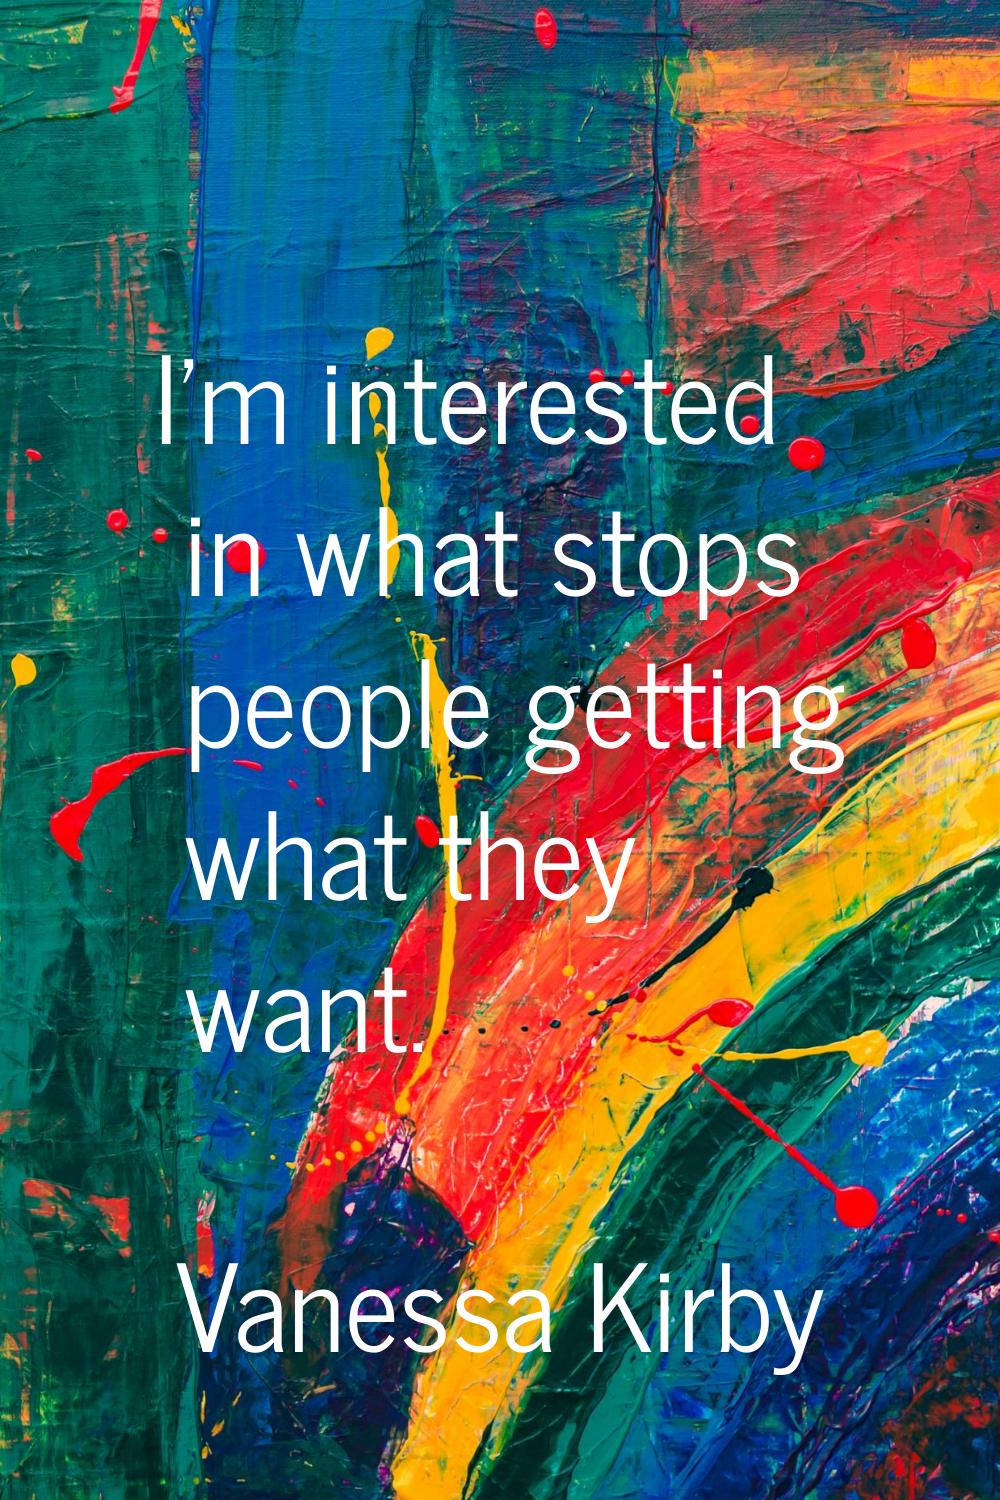 I'm interested in what stops people getting what they want.